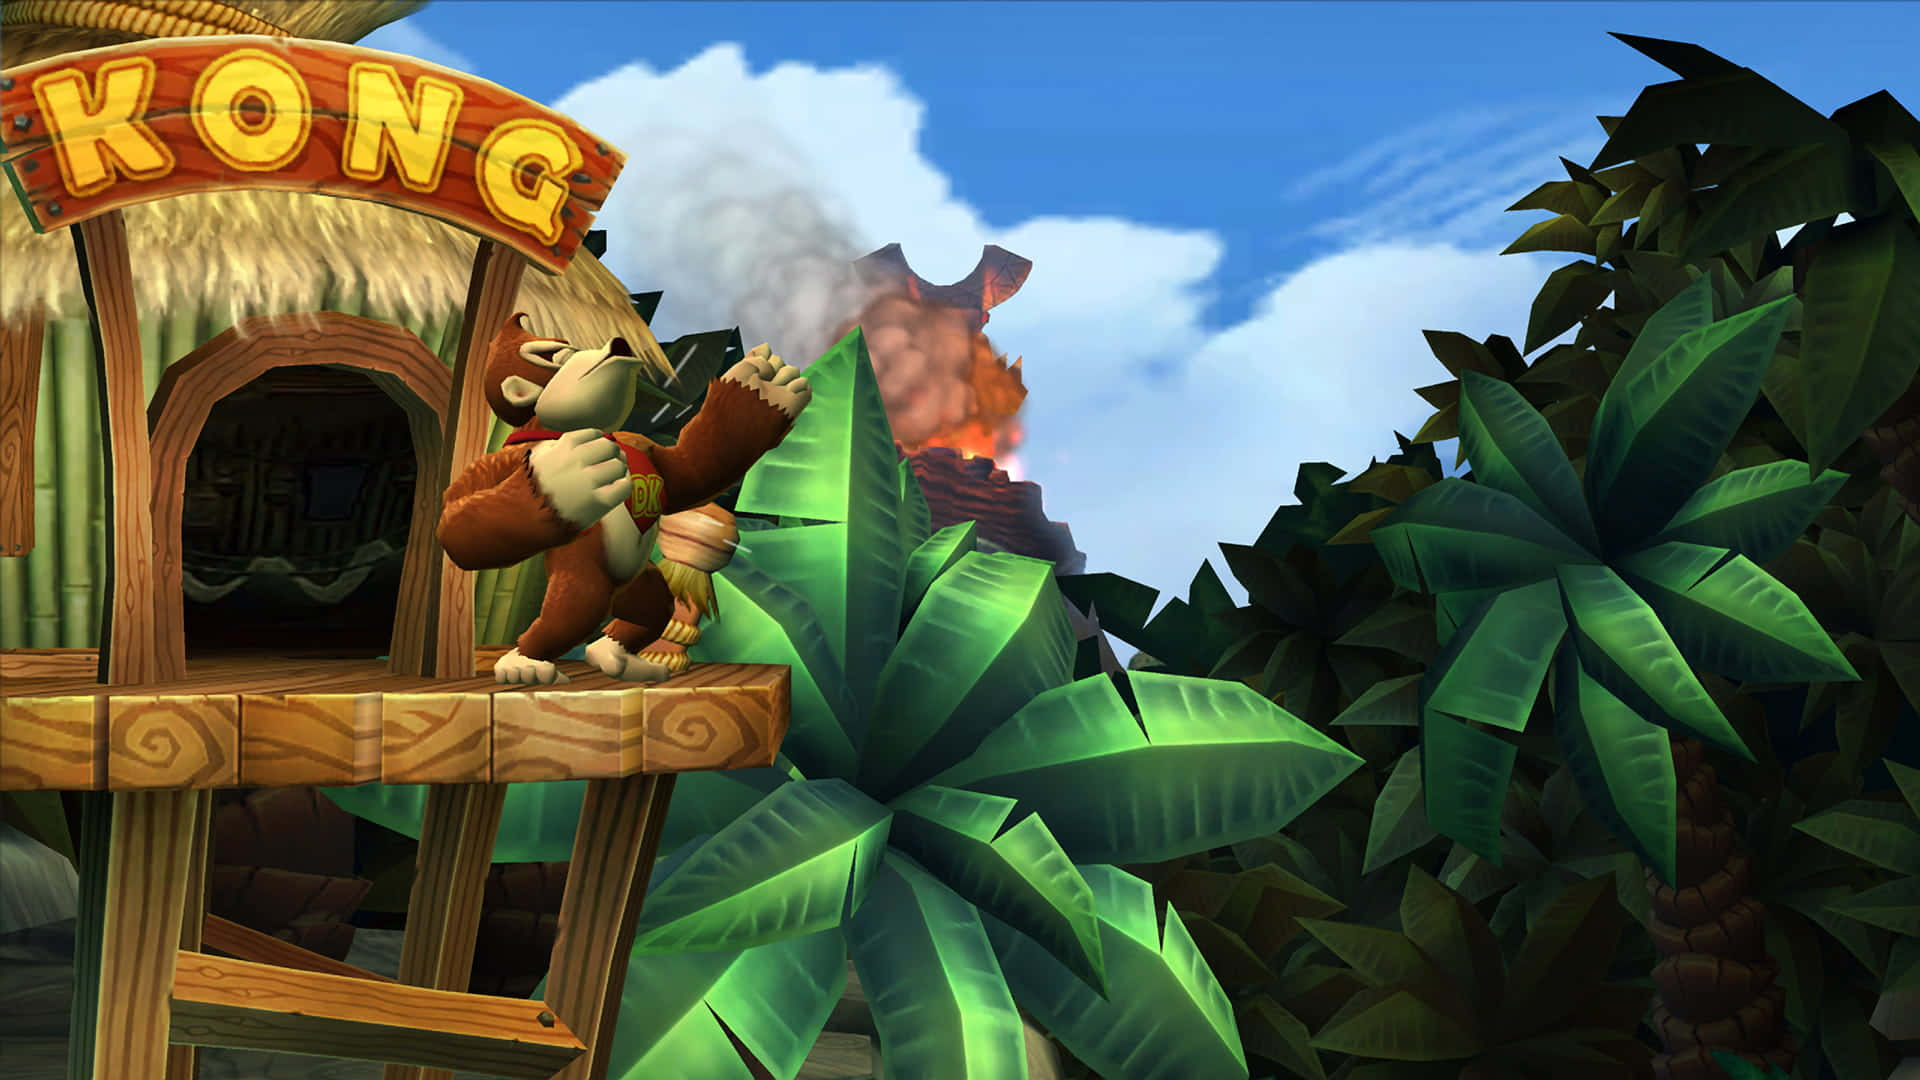 Donkey Kong Standing Heroically In A Jungle Environment